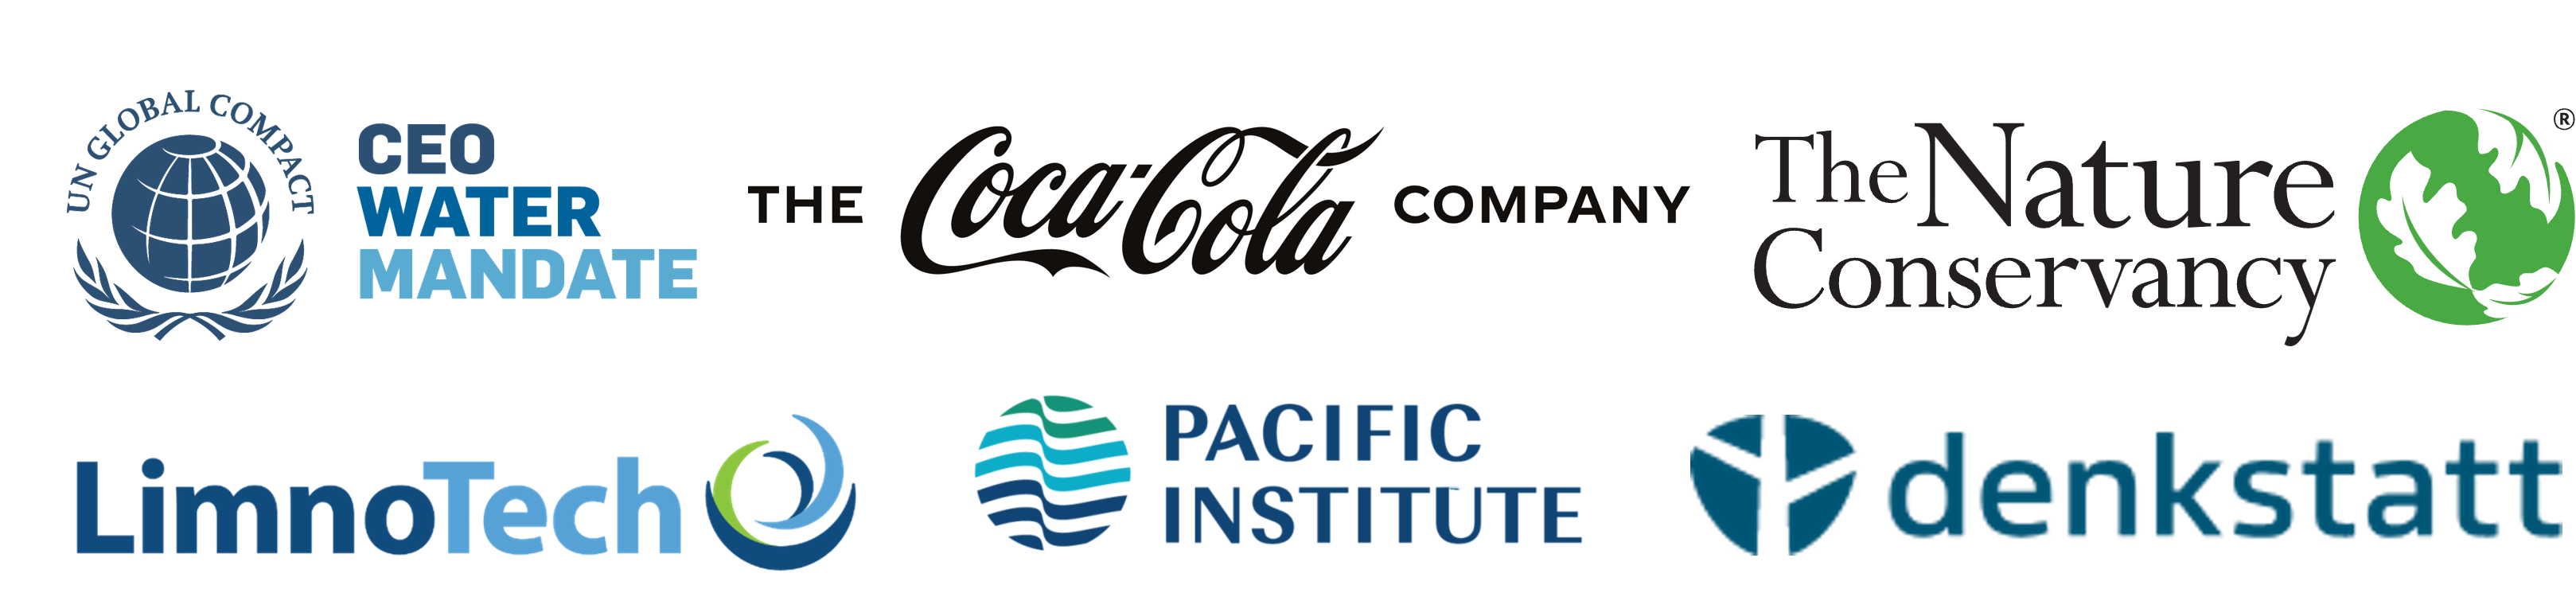 Logos of Partner Organizations: CEO Water Mandate, the Coca Cola Company, denkstatt, LimnoTech, Pacific Institute, and the Nature Conservancy